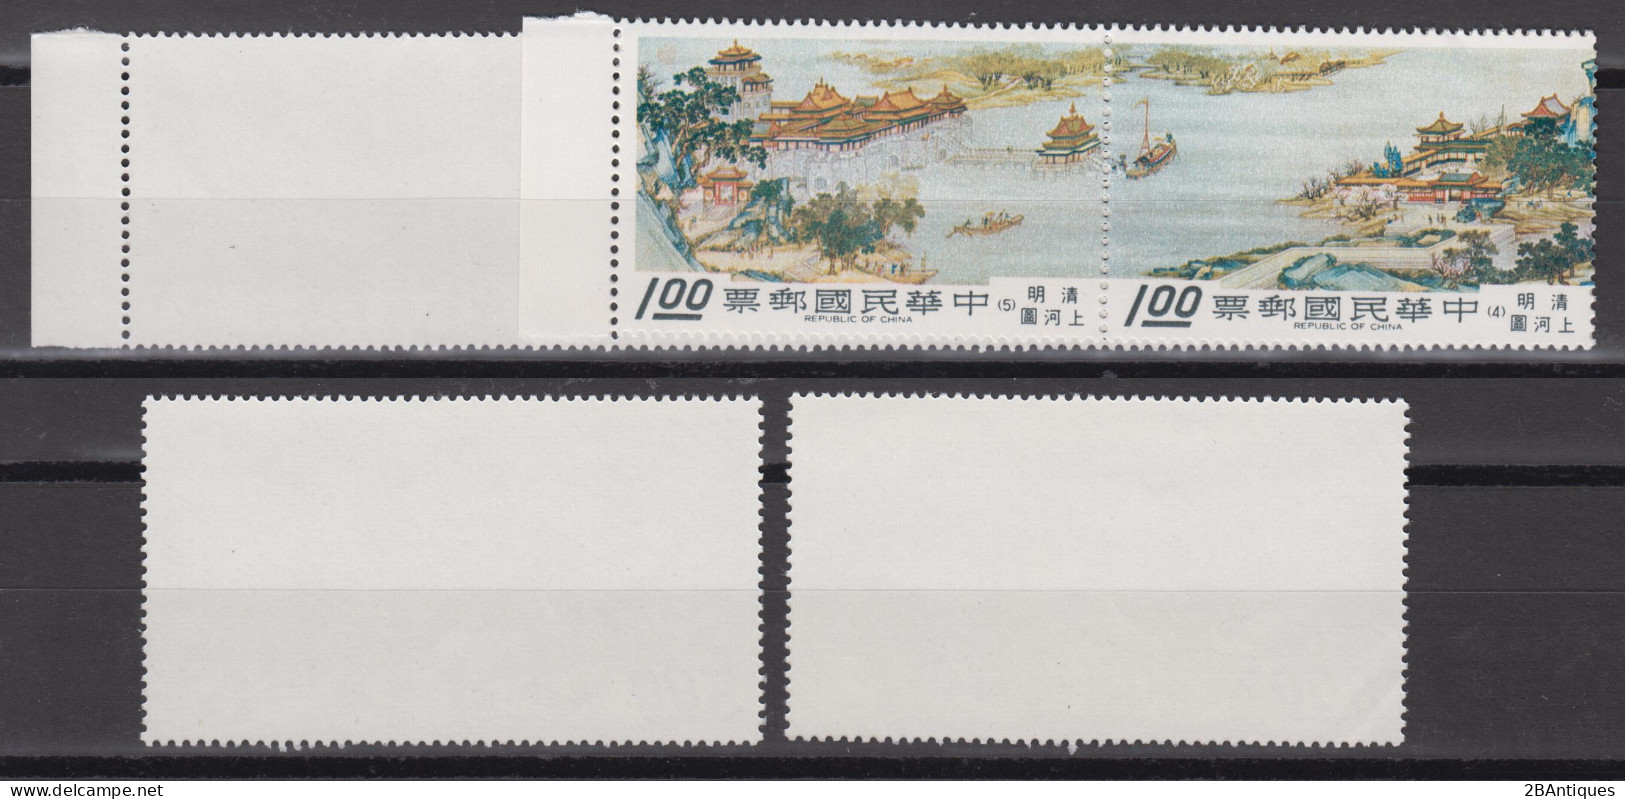 TAIWAN 1968 - "A City Of Cathay", Scroll, Palace Museum COMPLETE SET MNH** OG XF - Unused Stamps